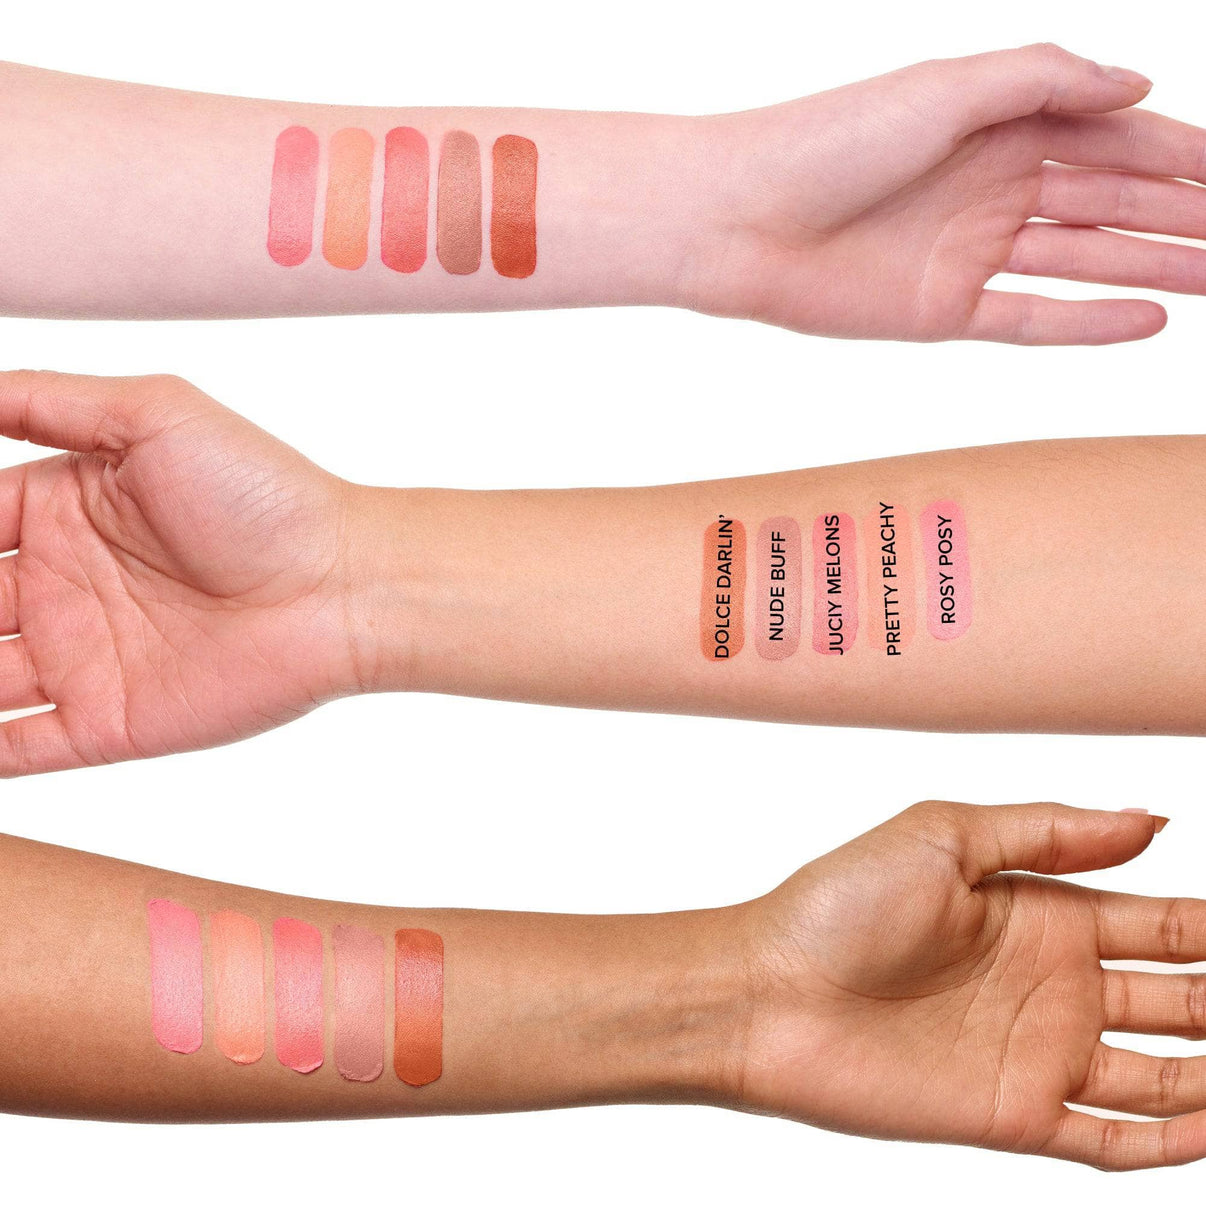 Arms with texture swatches of Nudies Matte Lux in shade Rosy Posy and other shades-9